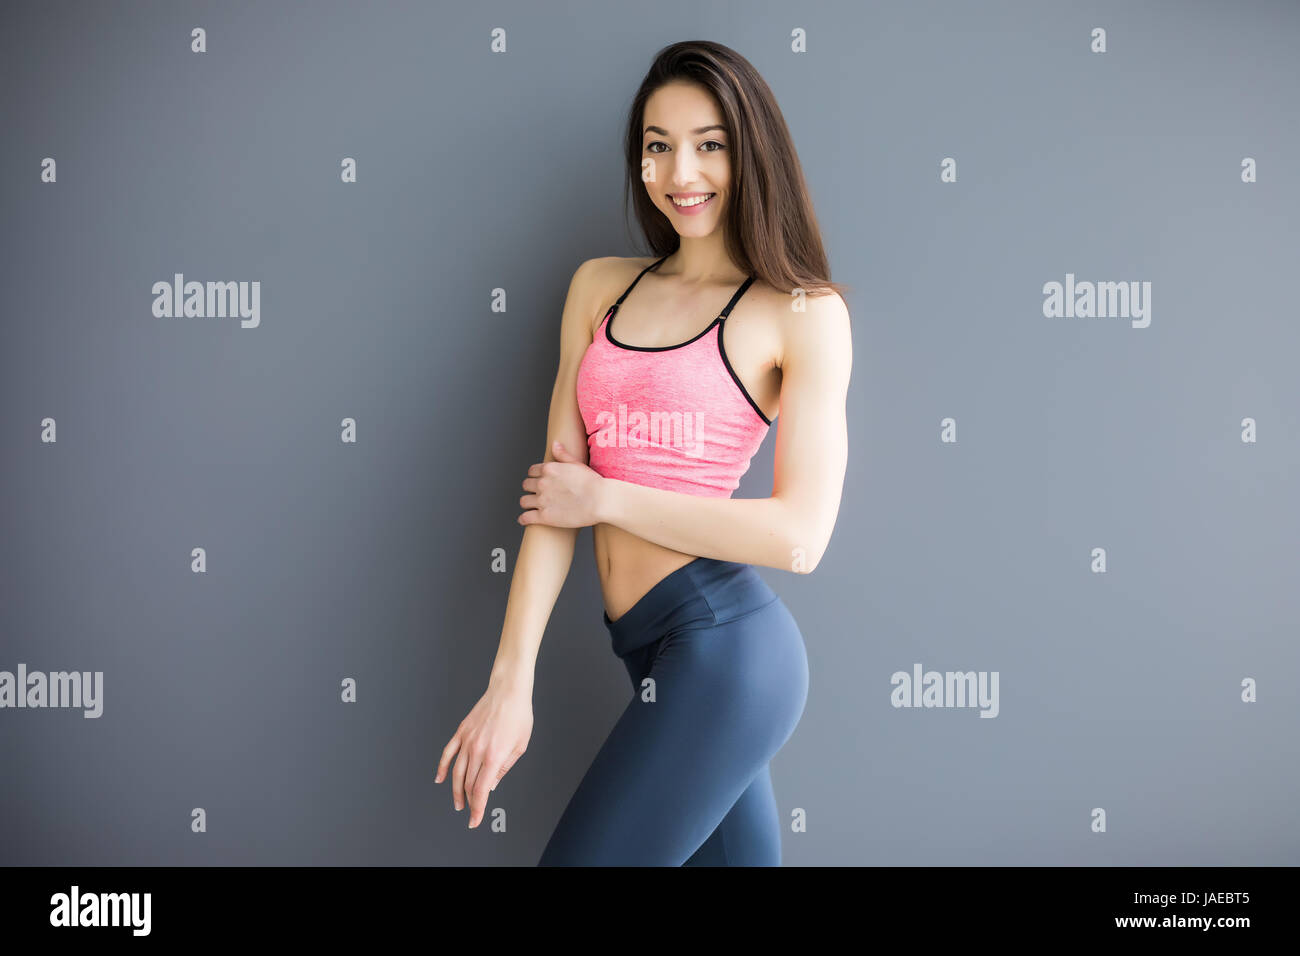 Sport girl isolated on gray background. Running fitness sport woman smiling  Stock Photo - Alamy